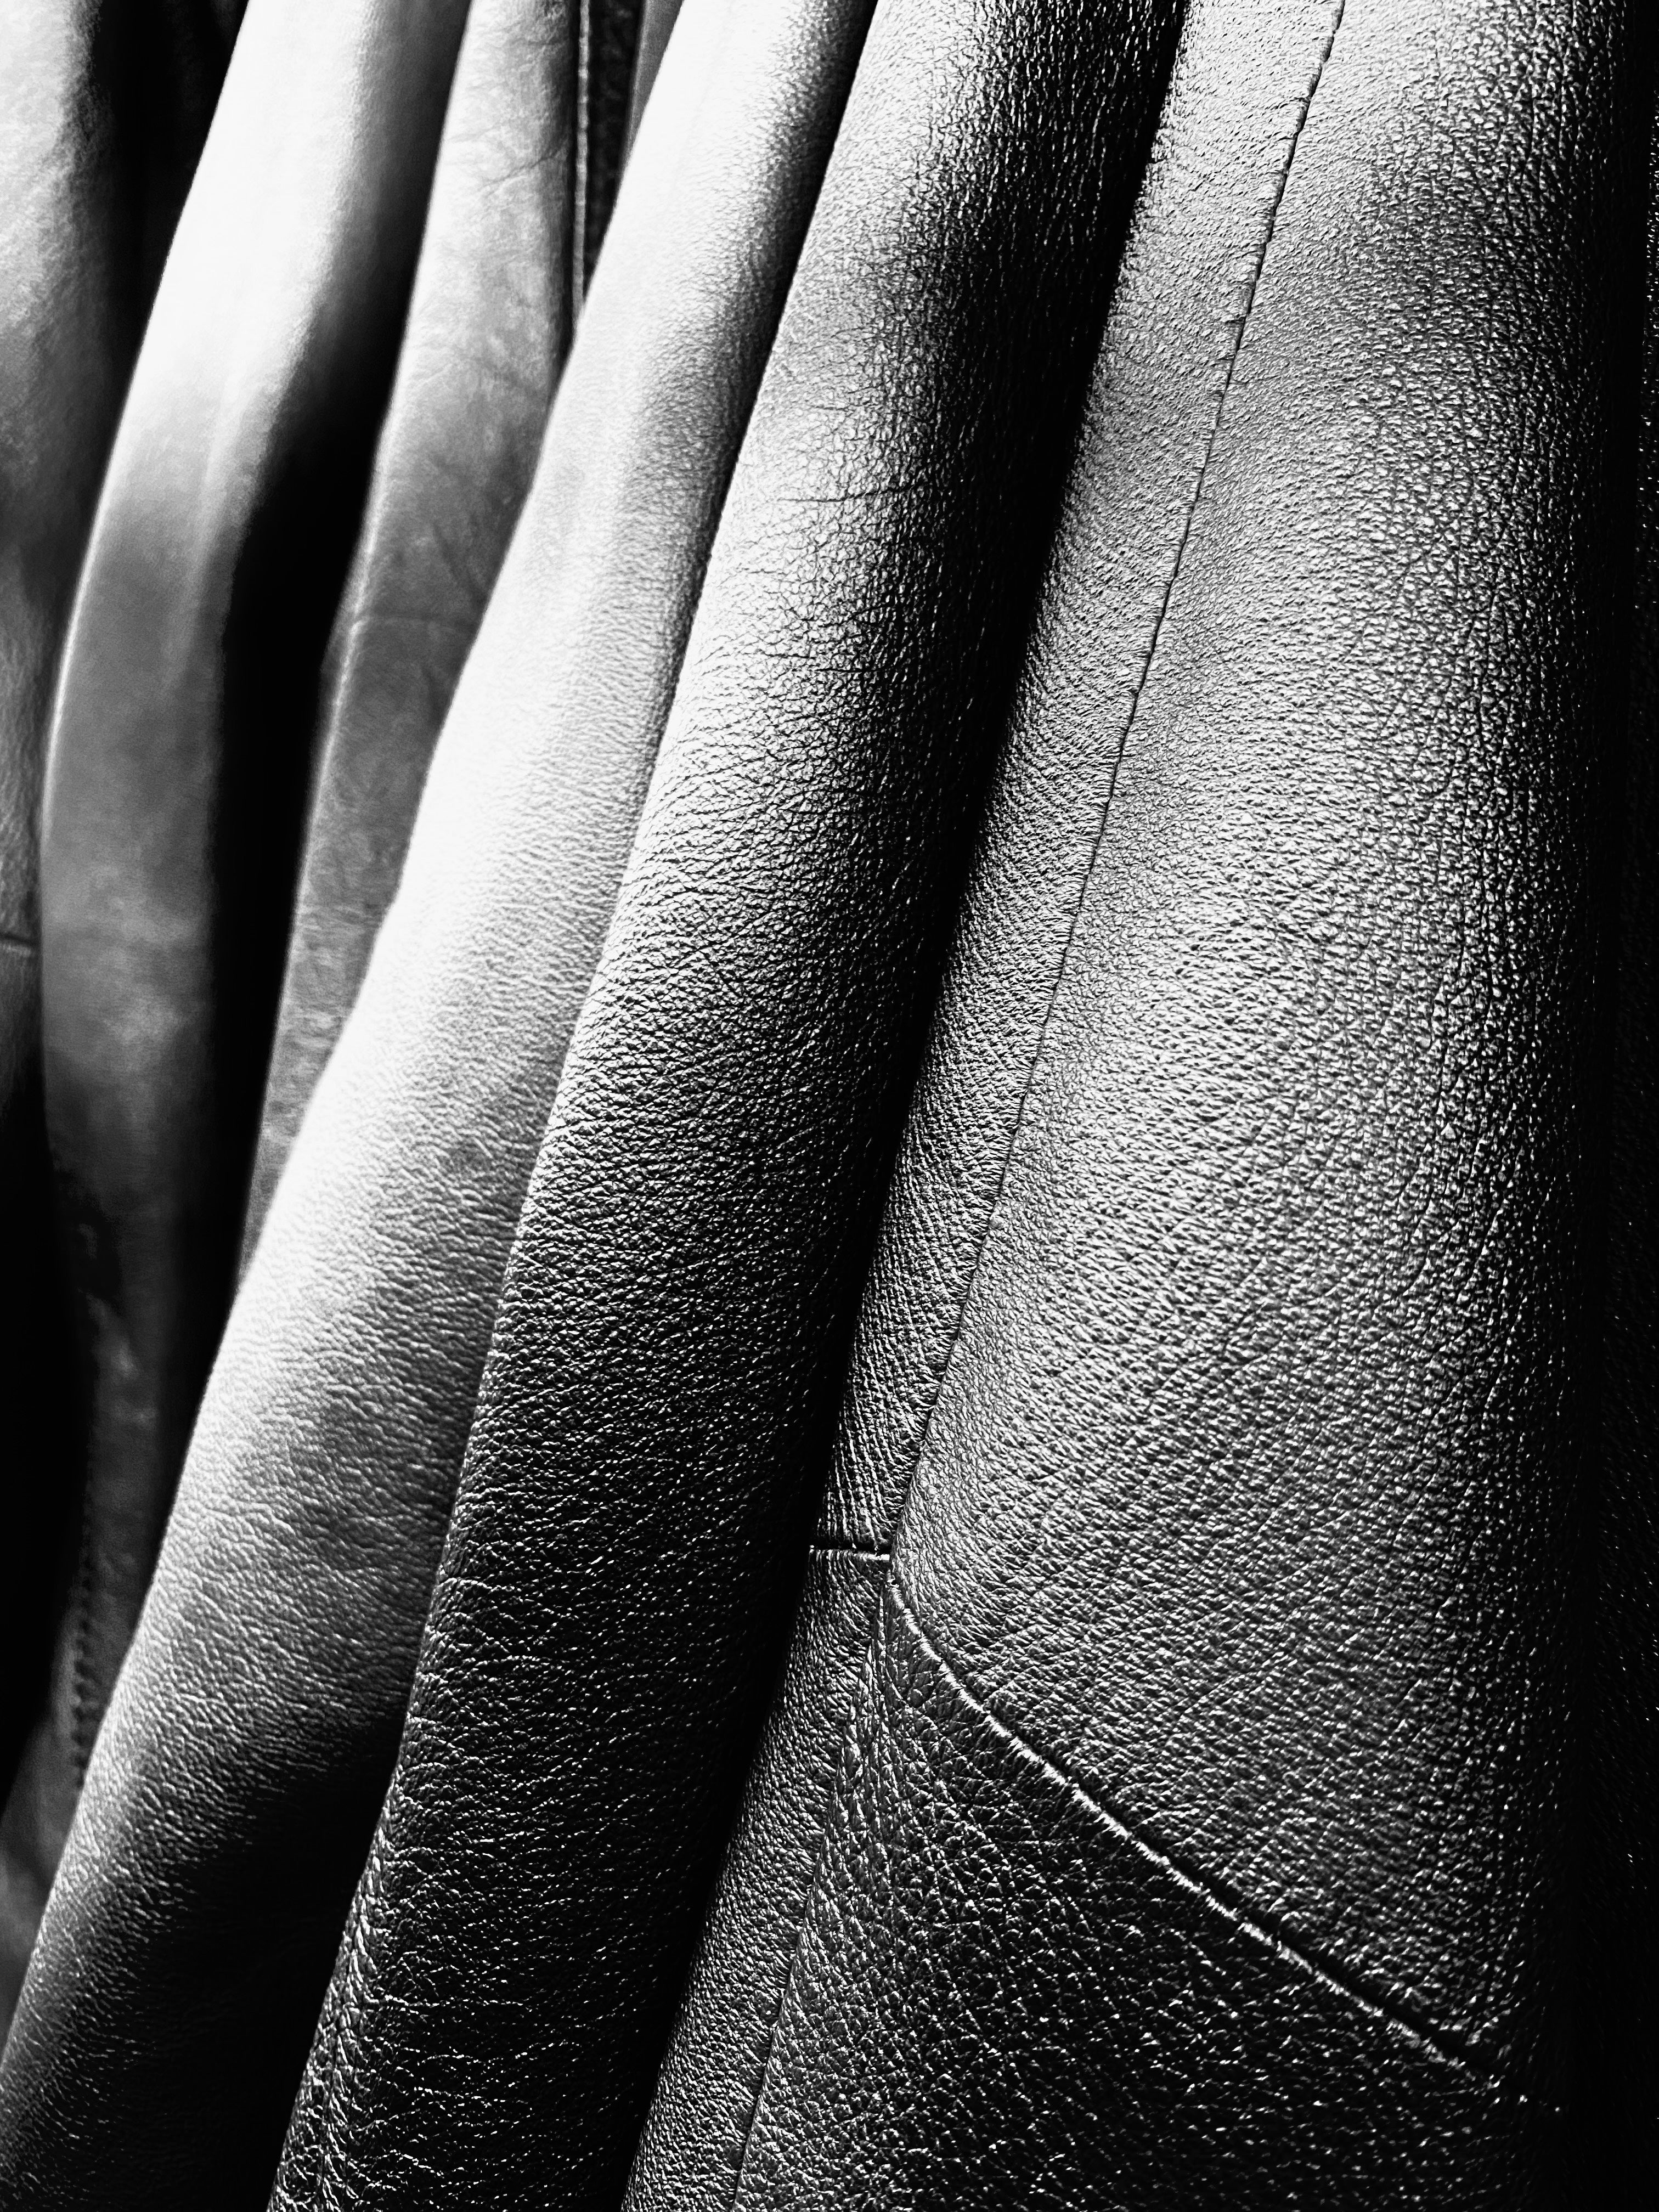 Rows of Leather get your leather cleaning services today wholesale at U.S. Leather Cleaning